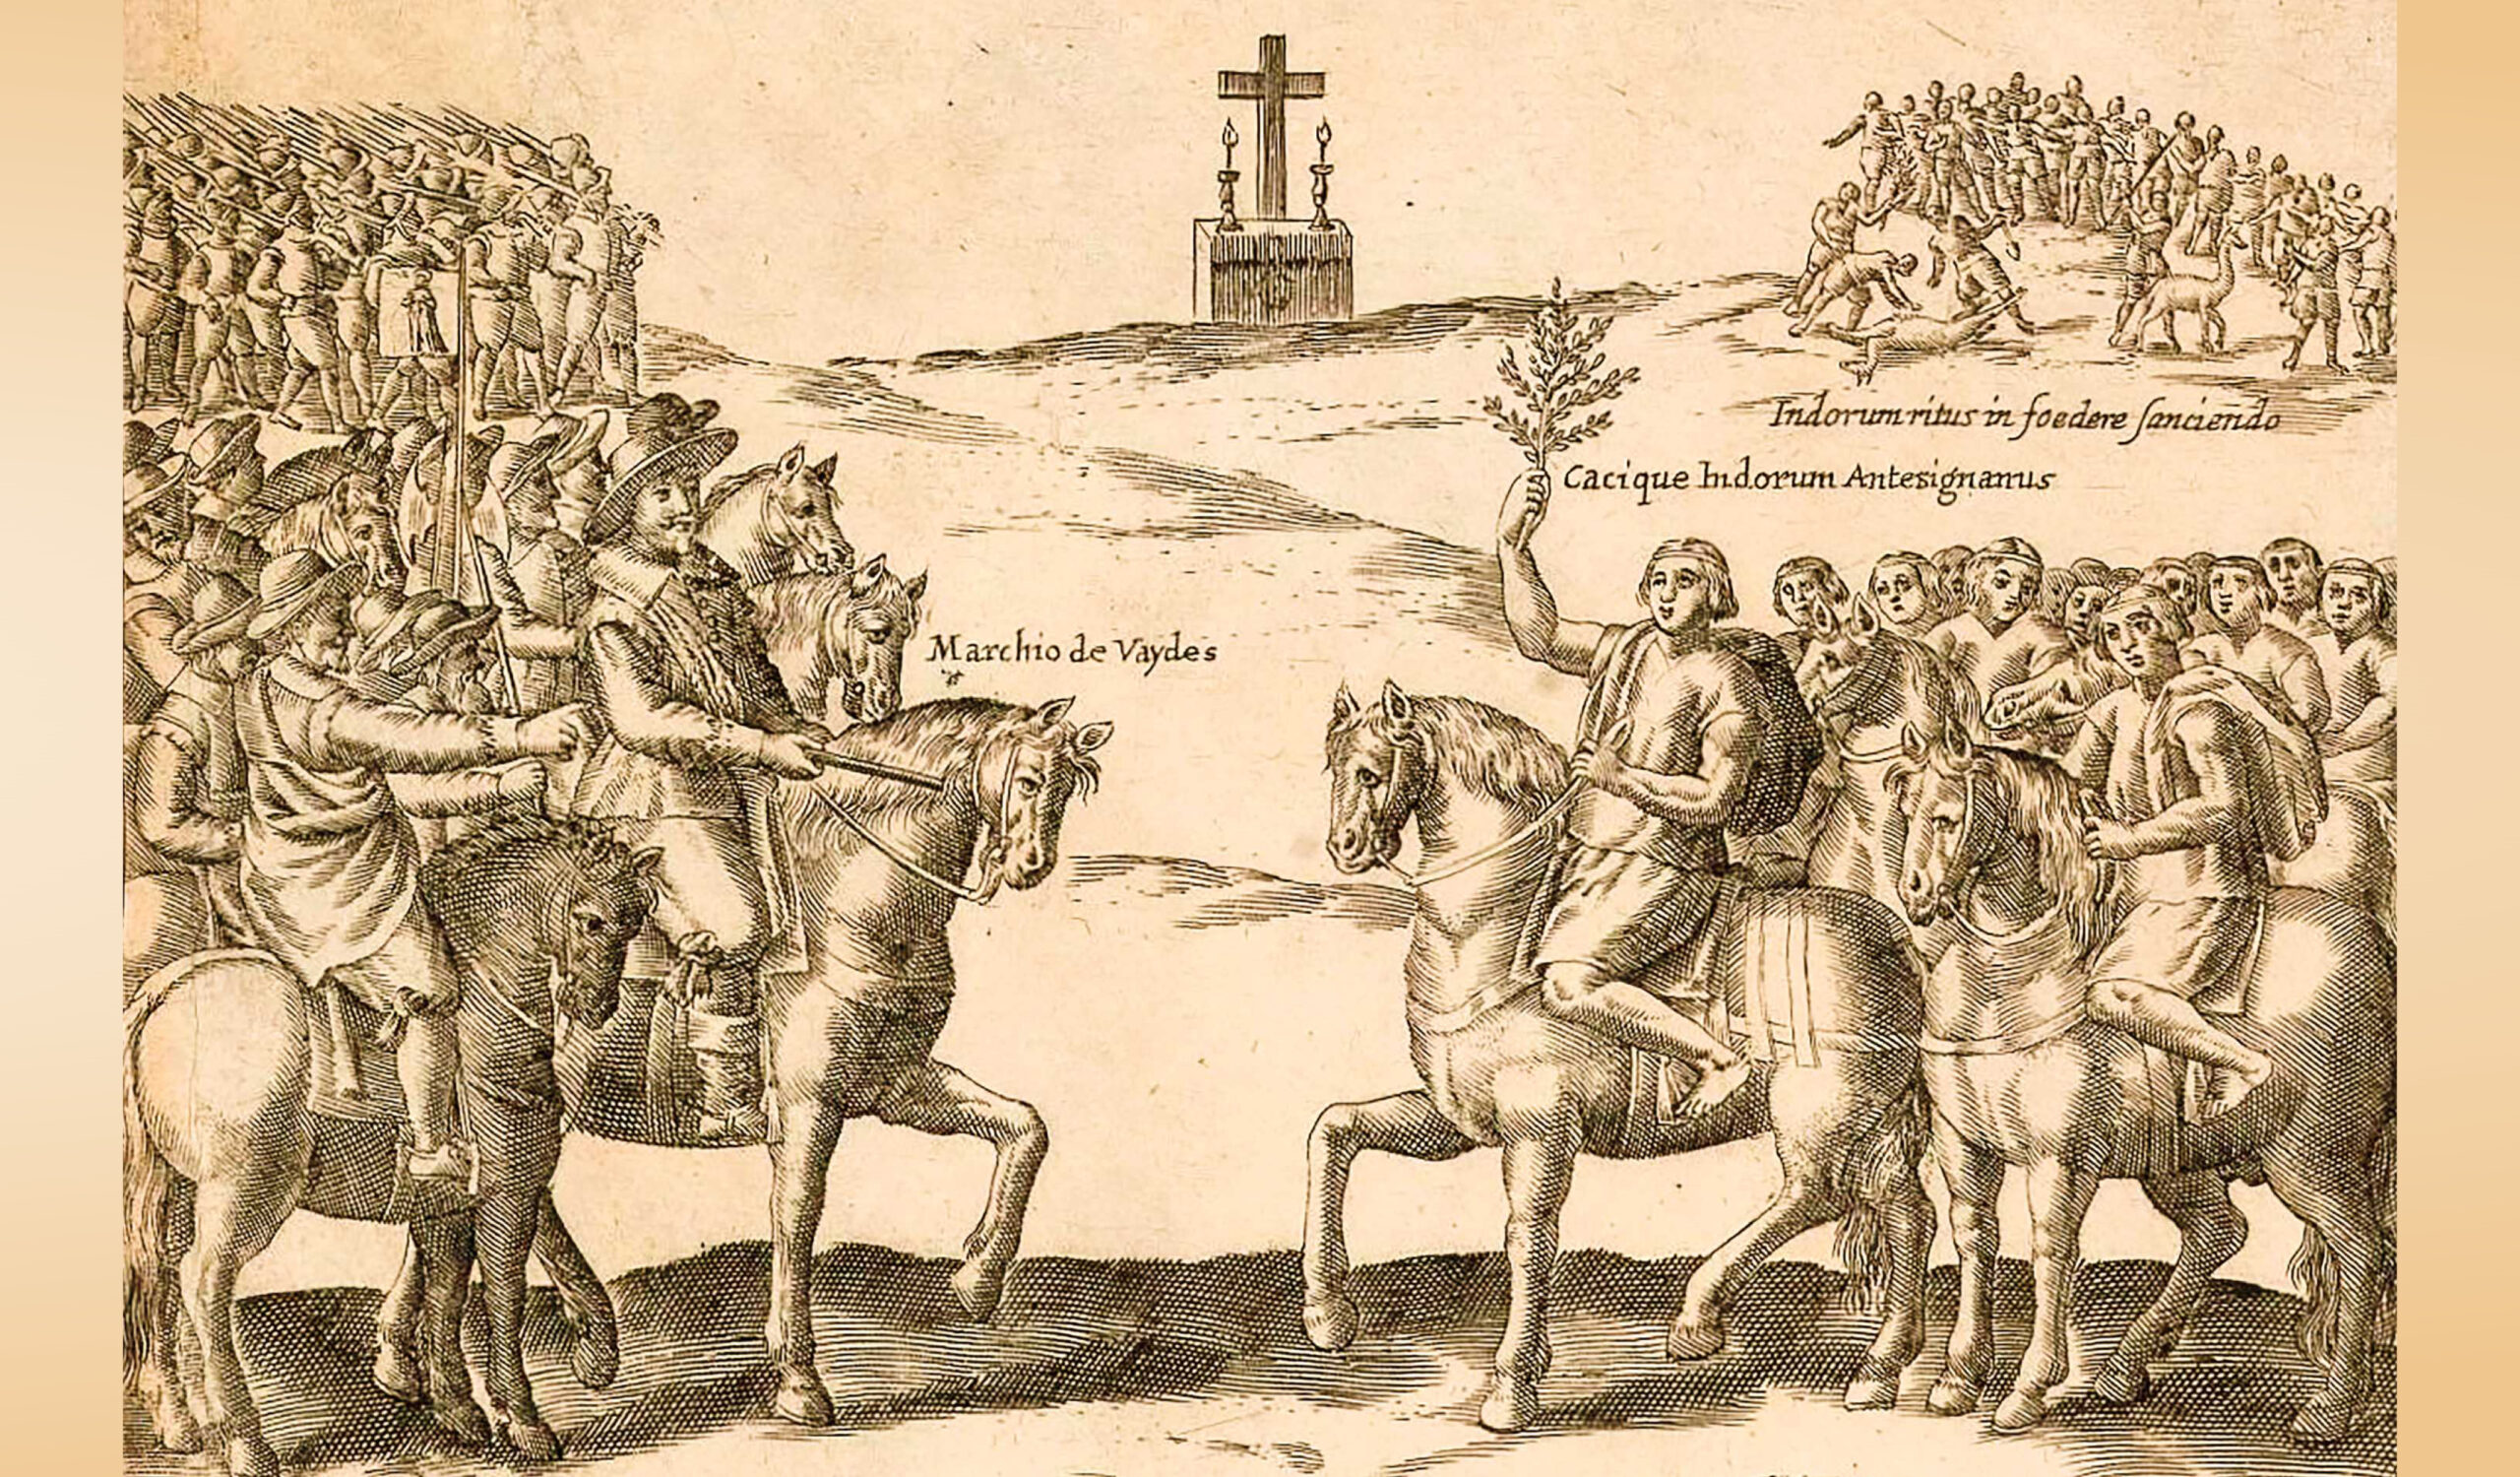 A 1646 drawing of the Parlamento of Quilín negotiations between the Mapuche and the Spanish.